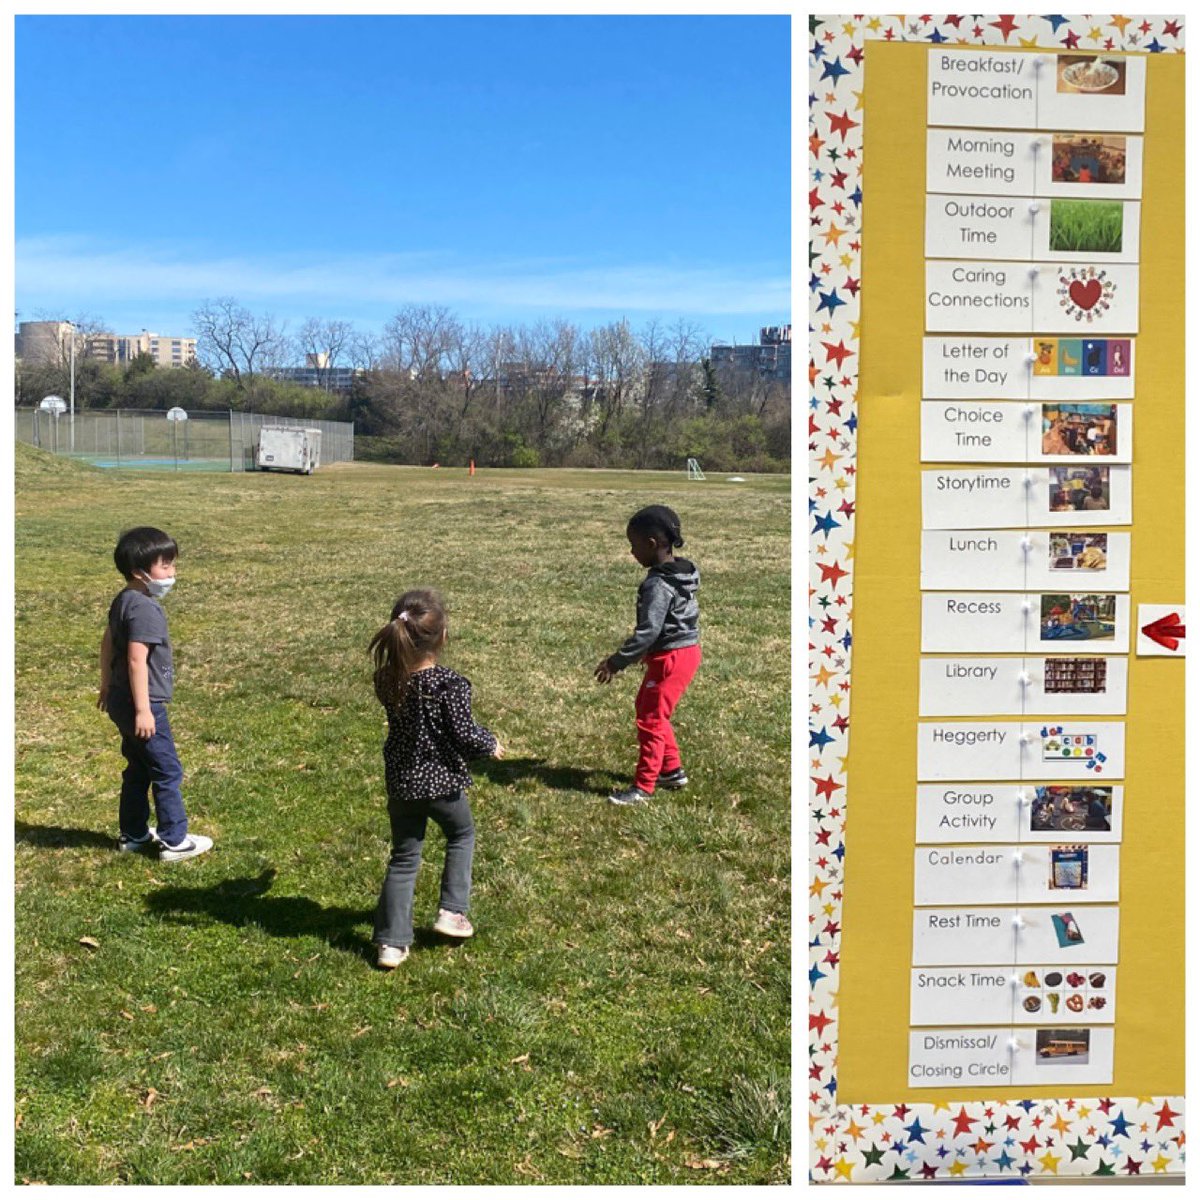 Enjoying a beautiful afternoon yesterday with Ms Aylor’s class at <a target='_blank' href='http://twitter.com/HFBAllStars'>@HFBAllStars</a> <a target='_blank' href='https://t.co/CRrx5mWUDD'>https://t.co/CRrx5mWUDD</a>